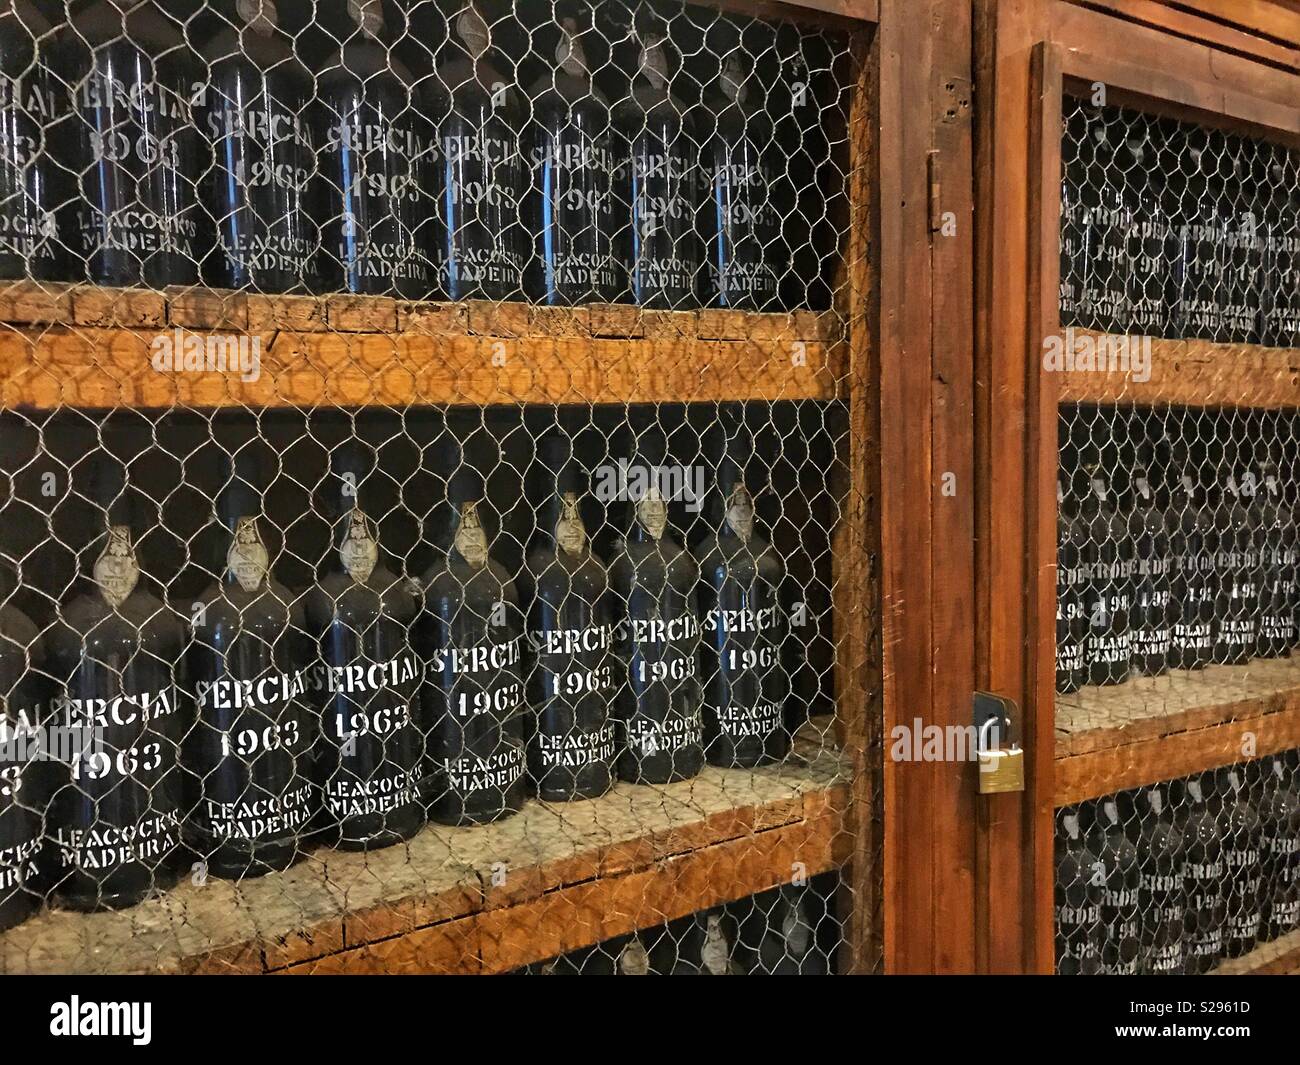 Bottles of 1963 Sercial, Blandy’s Wine Lodge, Funchal, Madeira Stock Photo